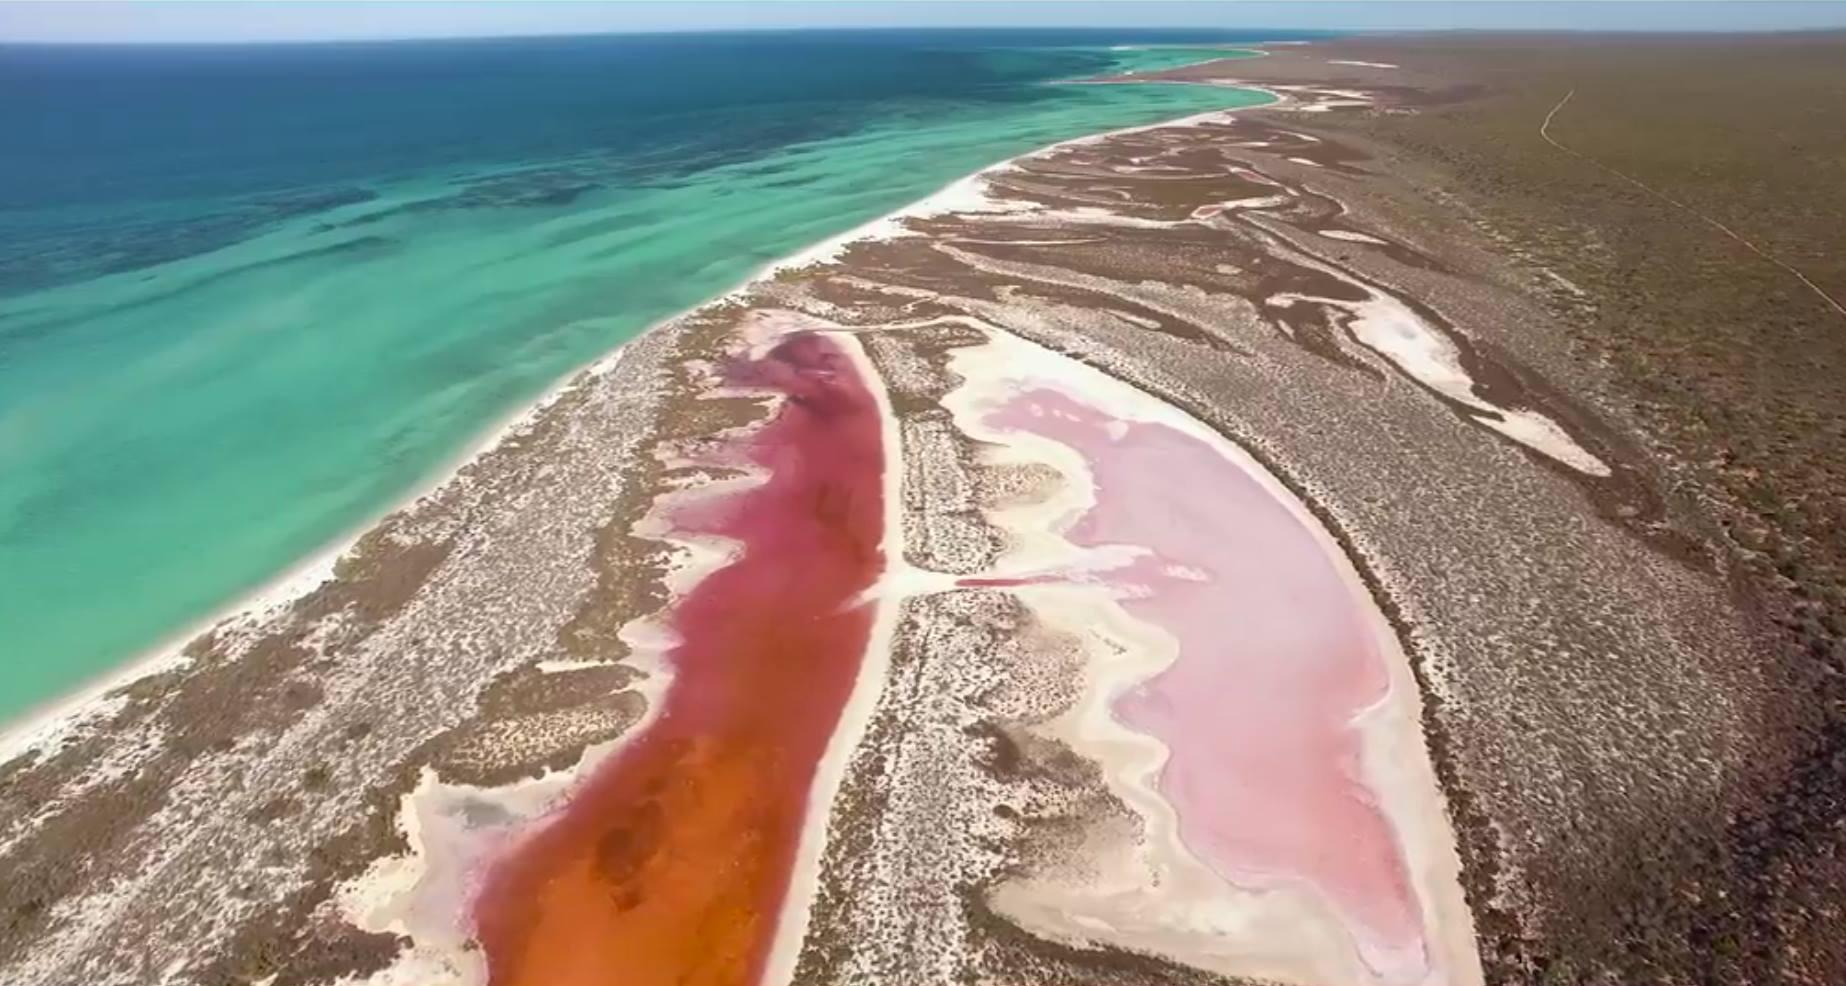 &#13;
Pink-tinged lakes bring some colour to the barren landscape &#13;